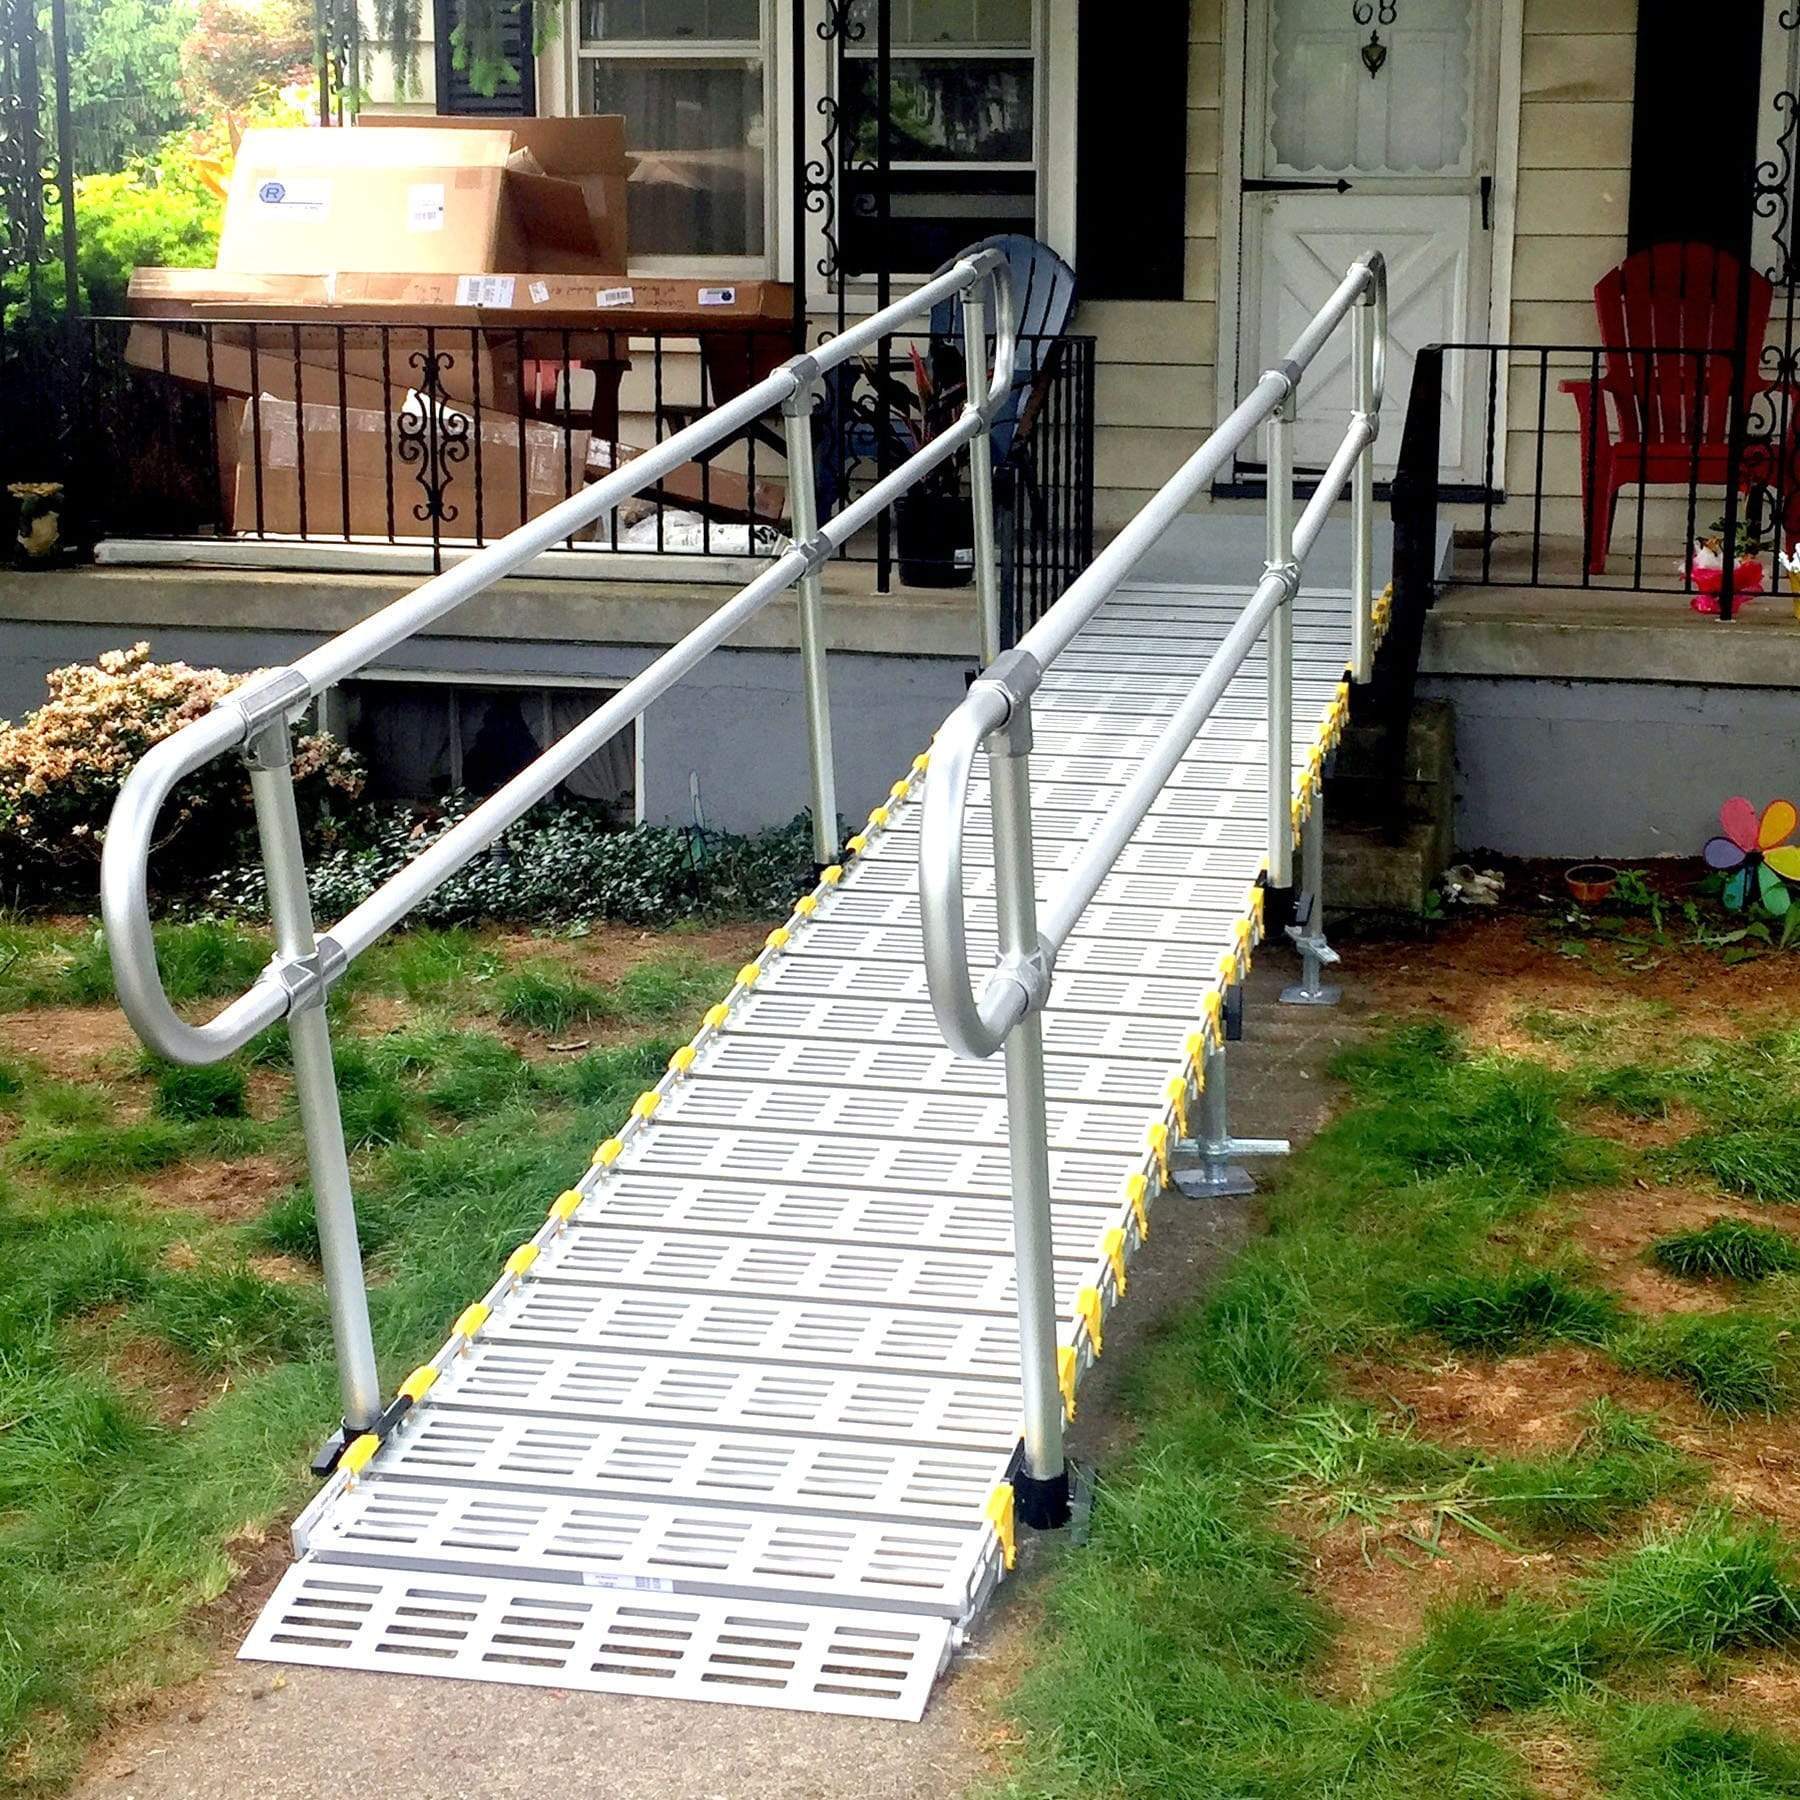 Roll-A-Ramp Modular Portable Ramp With Handrail On One Side M30-5-1